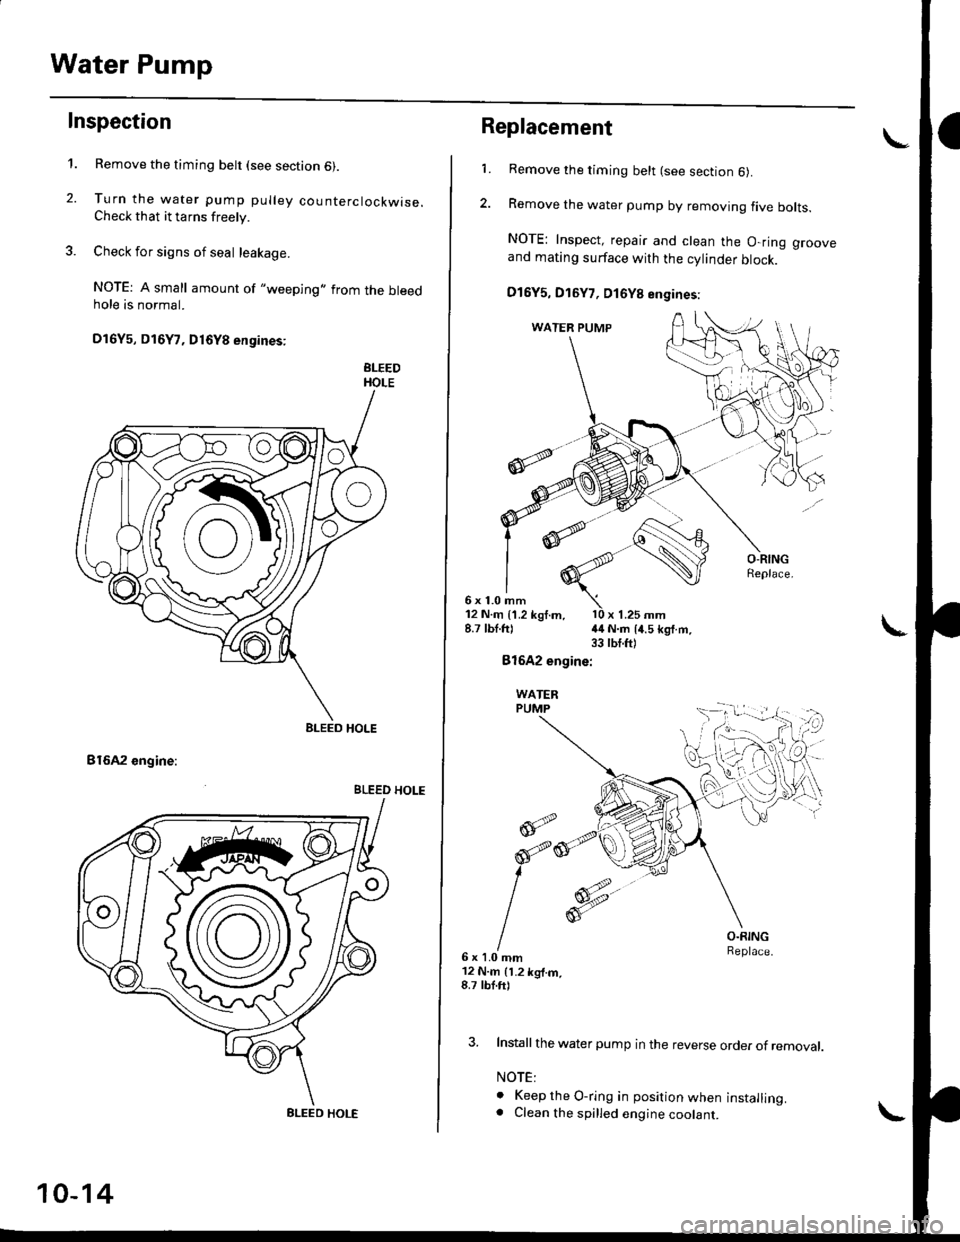 HONDA CIVIC 1997 6.G Owners Manual Water Pump
Inspection
t.
2.
Remove the timing belt (see section 6).
Turn the water pump pulley counterclockwise.Check that it tarns freely.
Check for signs of seal leakage.
NOTE: A small amount of "w